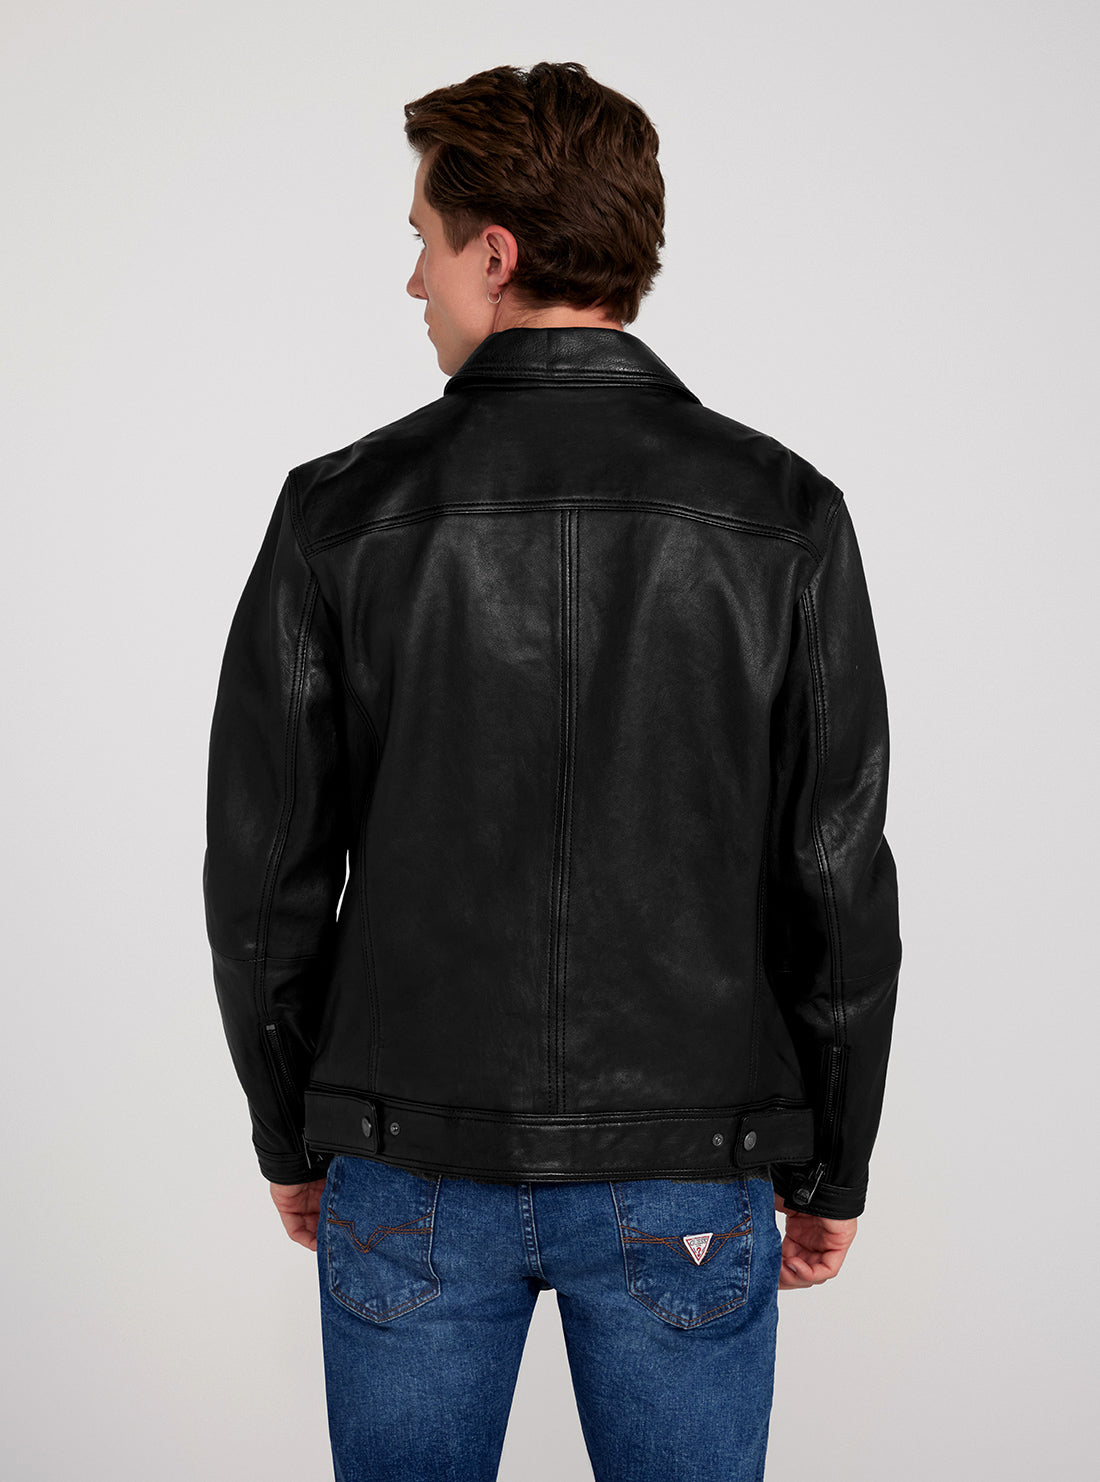 GUESS Black Leather Jacket back view